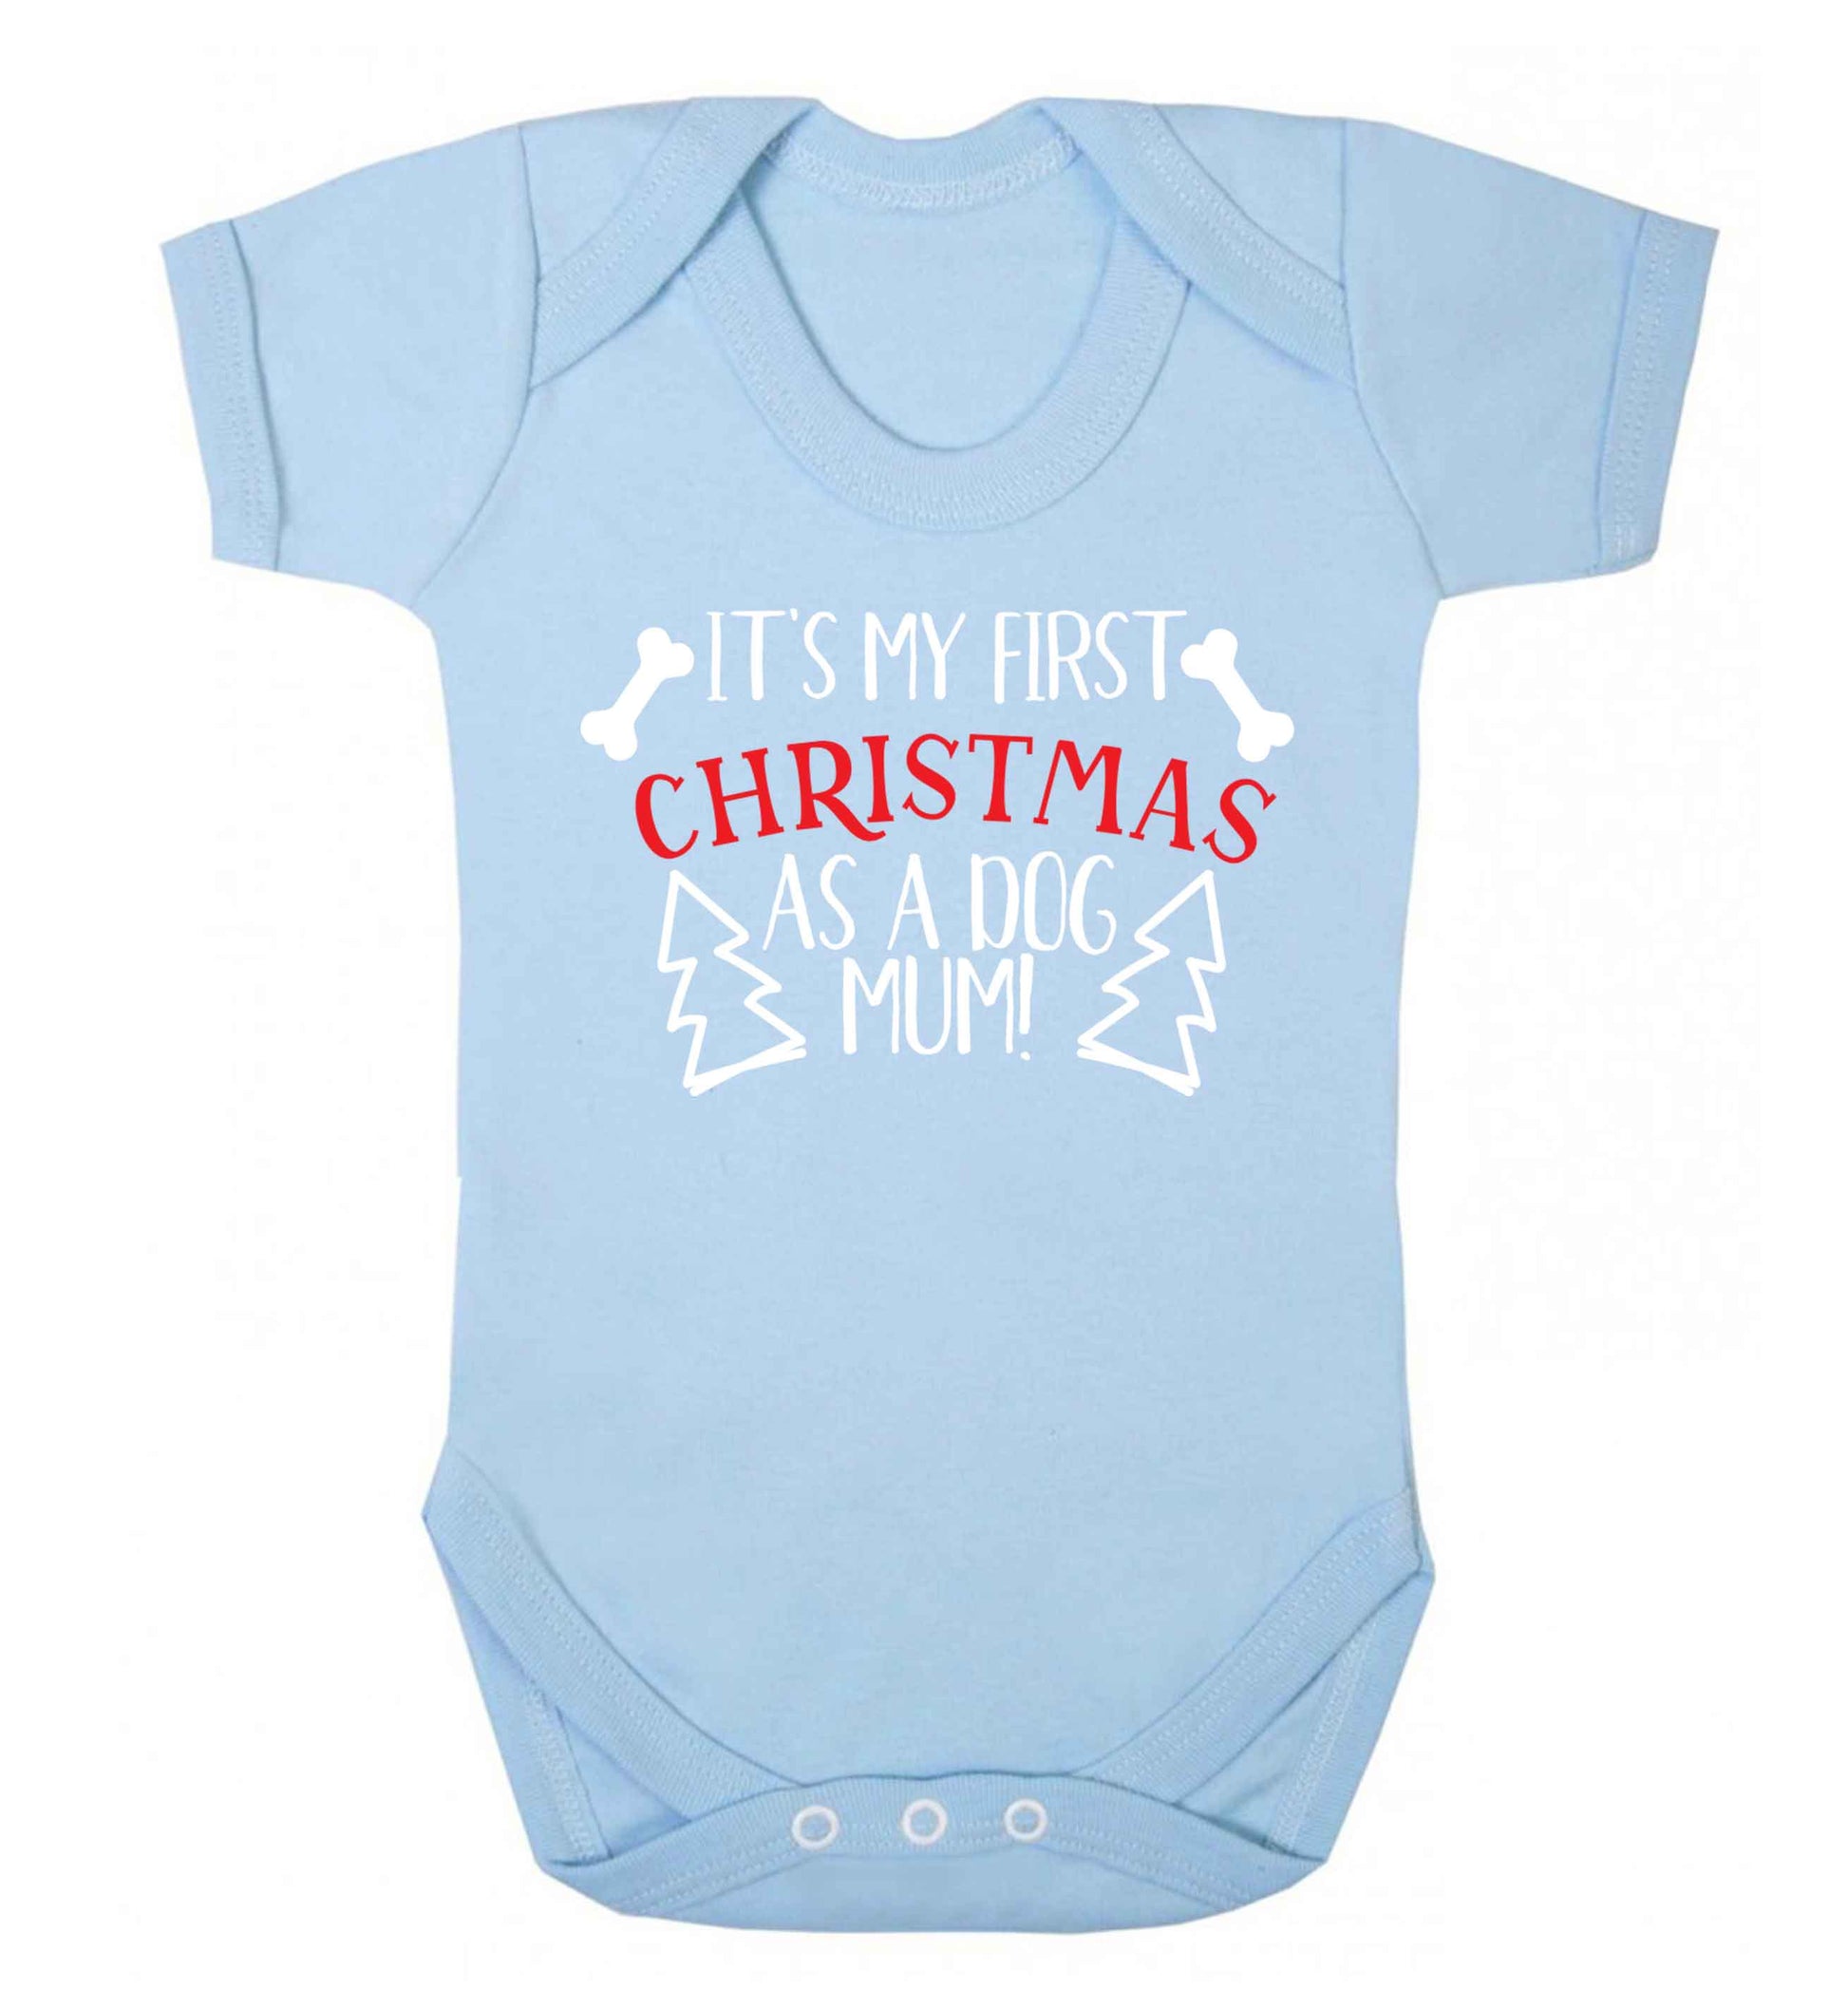 It's my first Christmas as a dog mum! Baby Vest pale blue 18-24 months